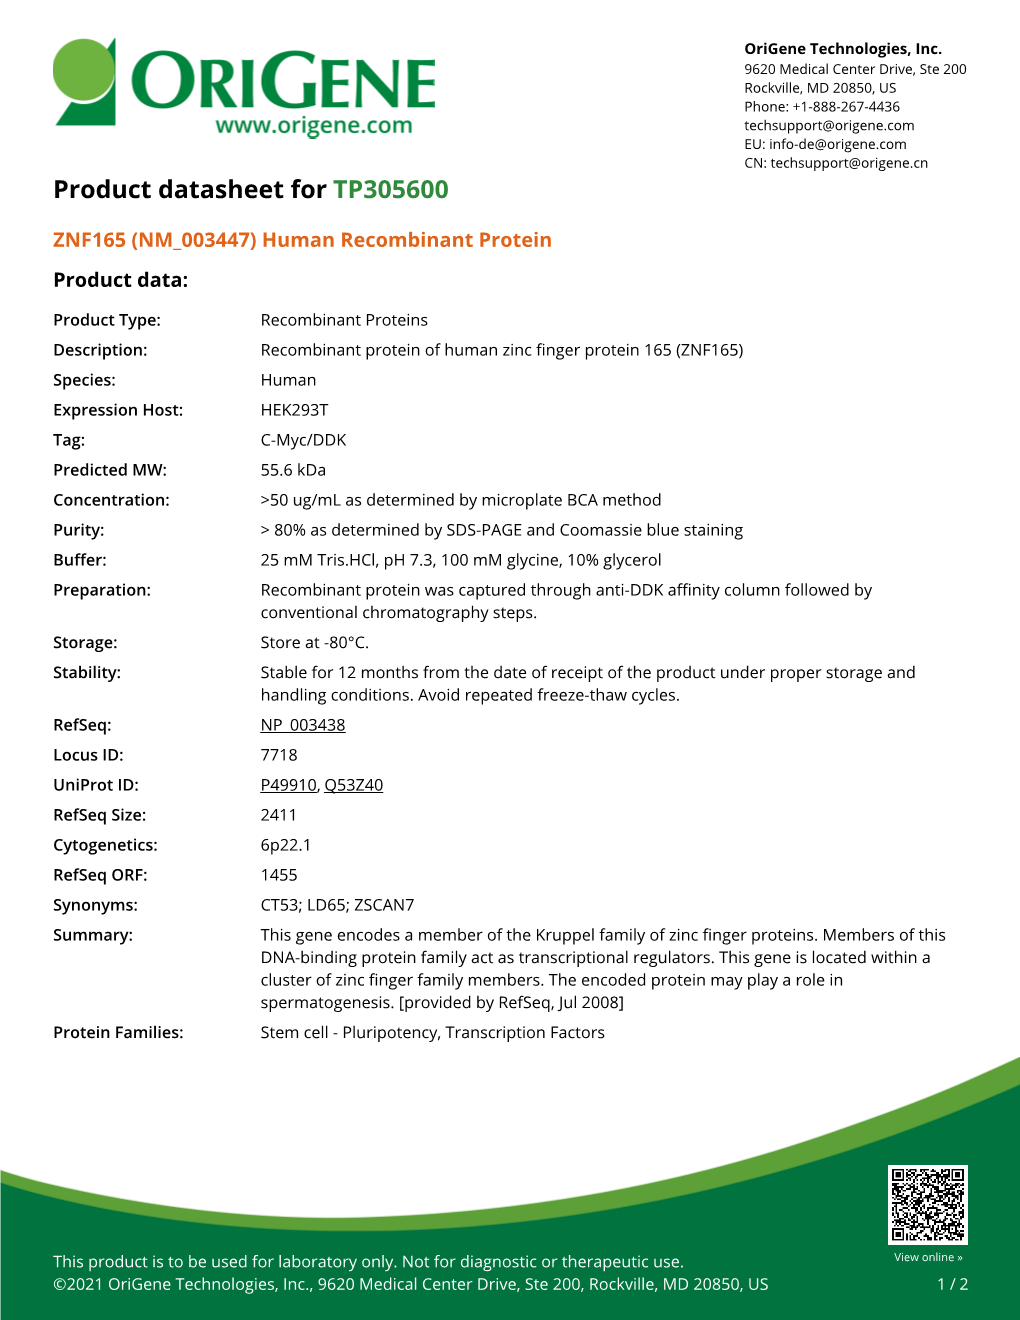 Human Recombinant Protein – TP305600